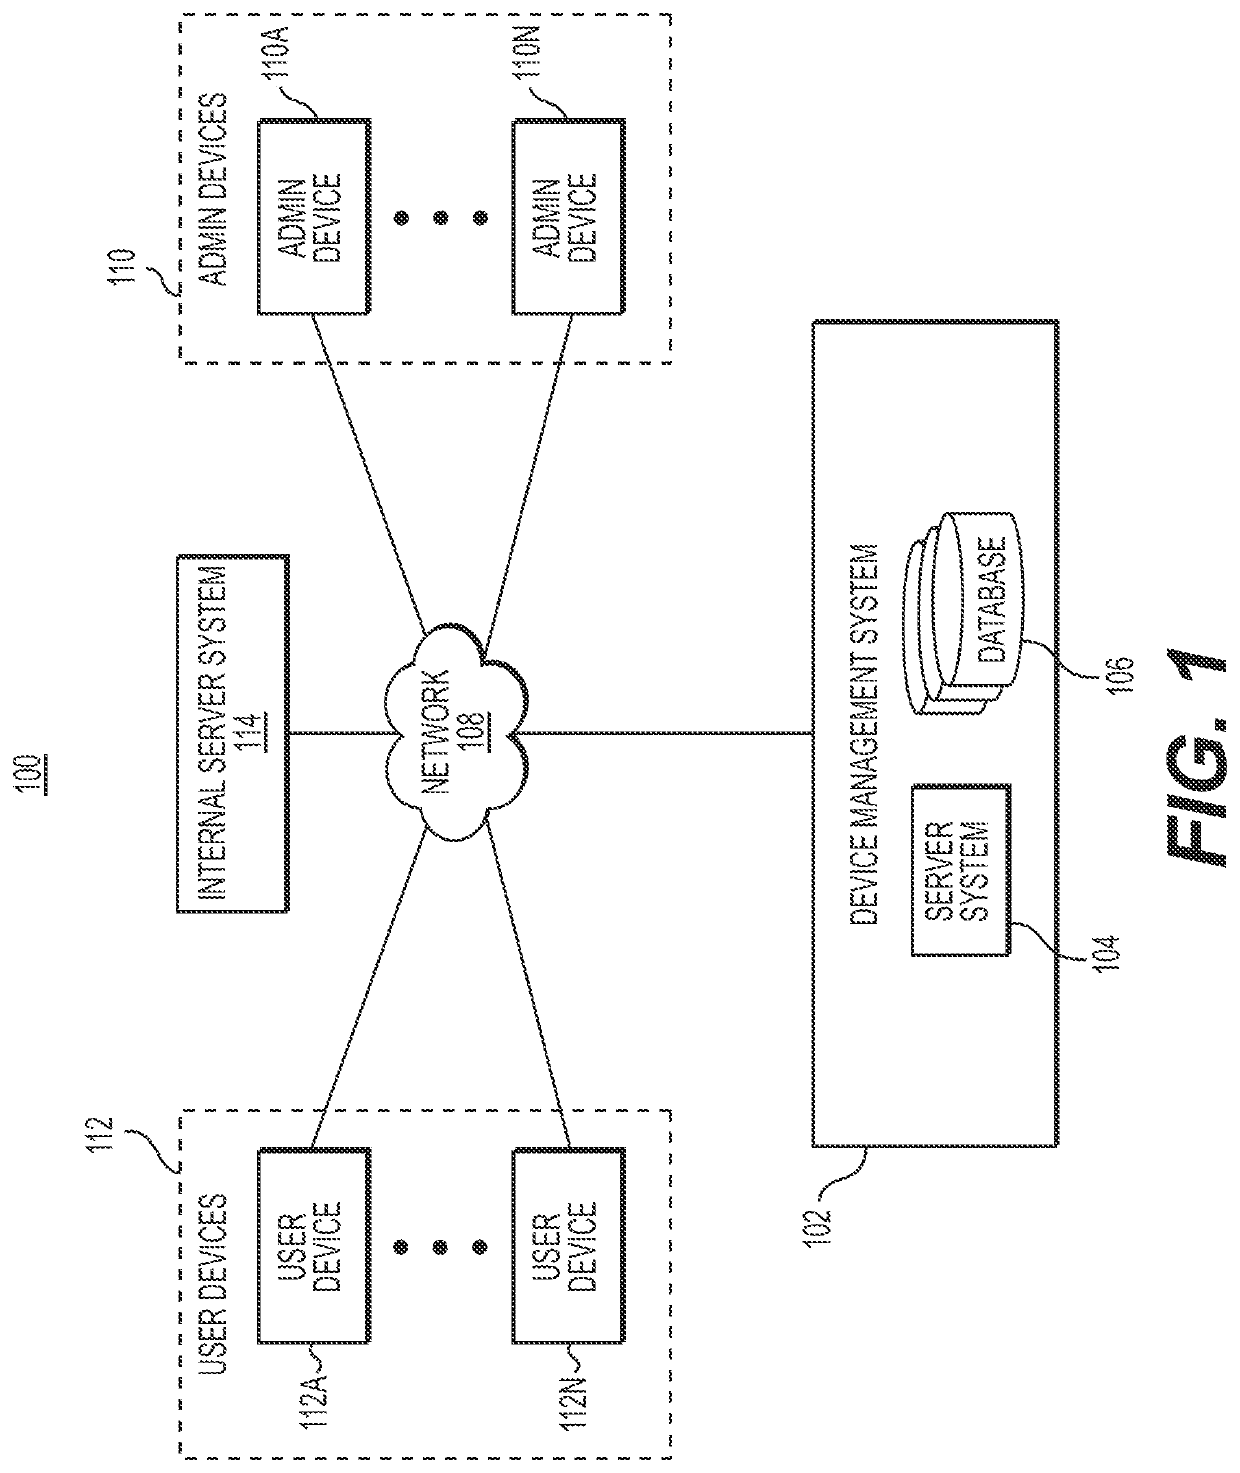 Systems and methods for using automated browsing to recover secured key from a single data entry